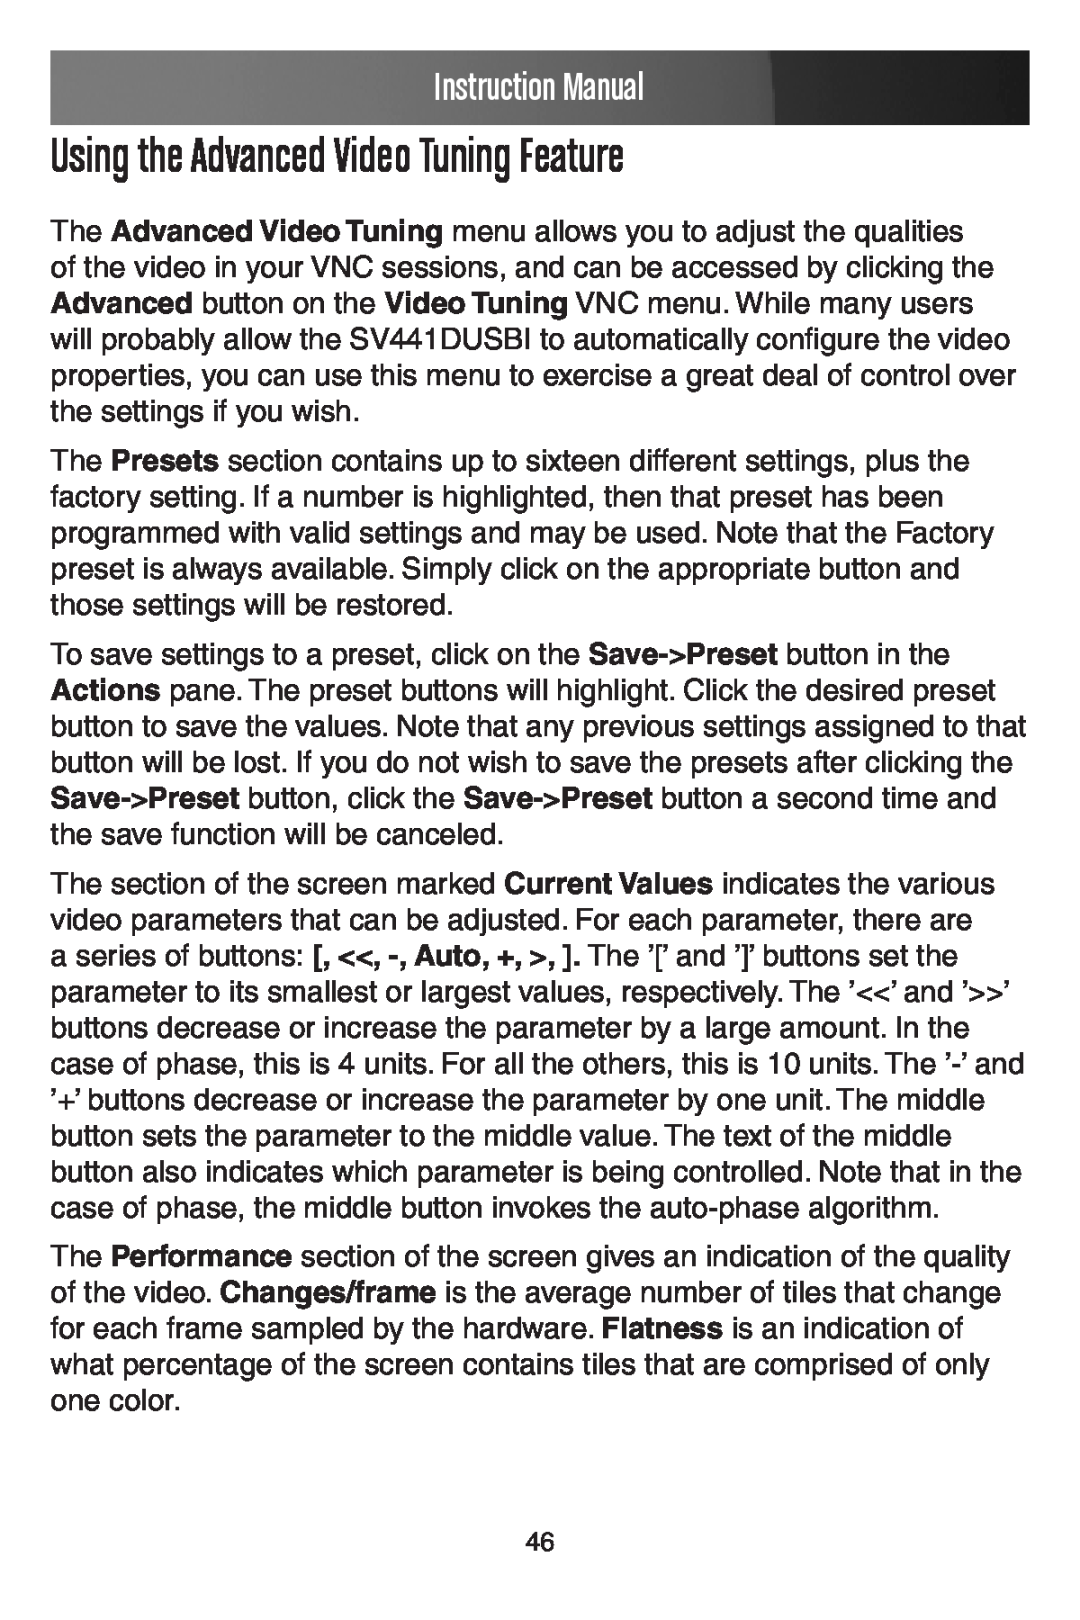 StarTech.com SV441DUSBI instruction manual Using the Advanced Video Tuning Feature, Instruction Manual 